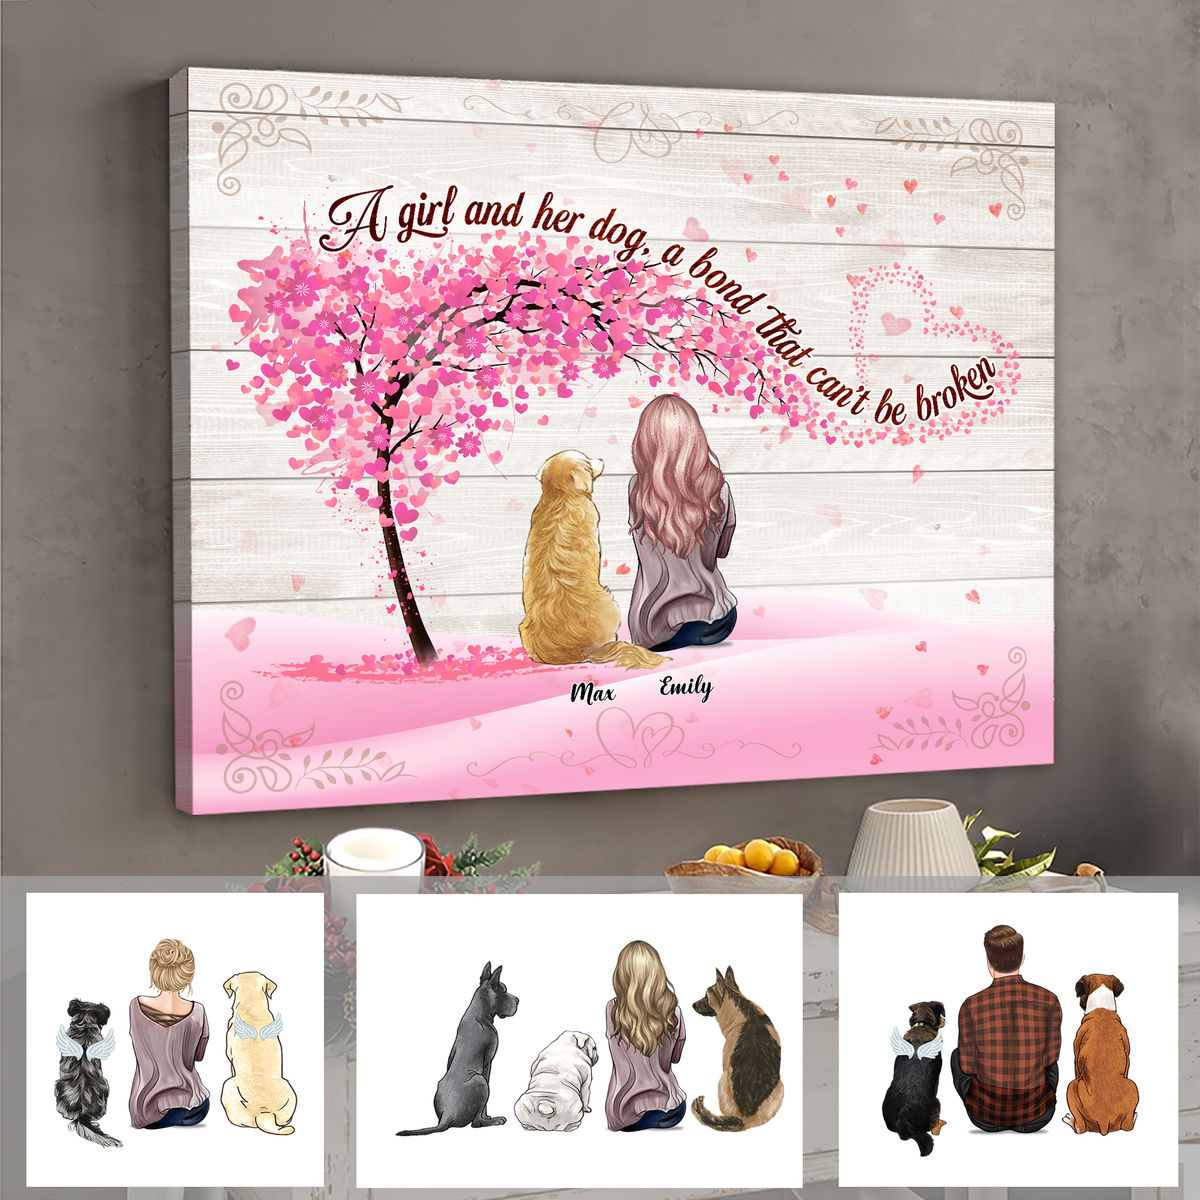 Christmas Gift - A girl and her dog, a bond that can't be broken - Dog Lover Gifts